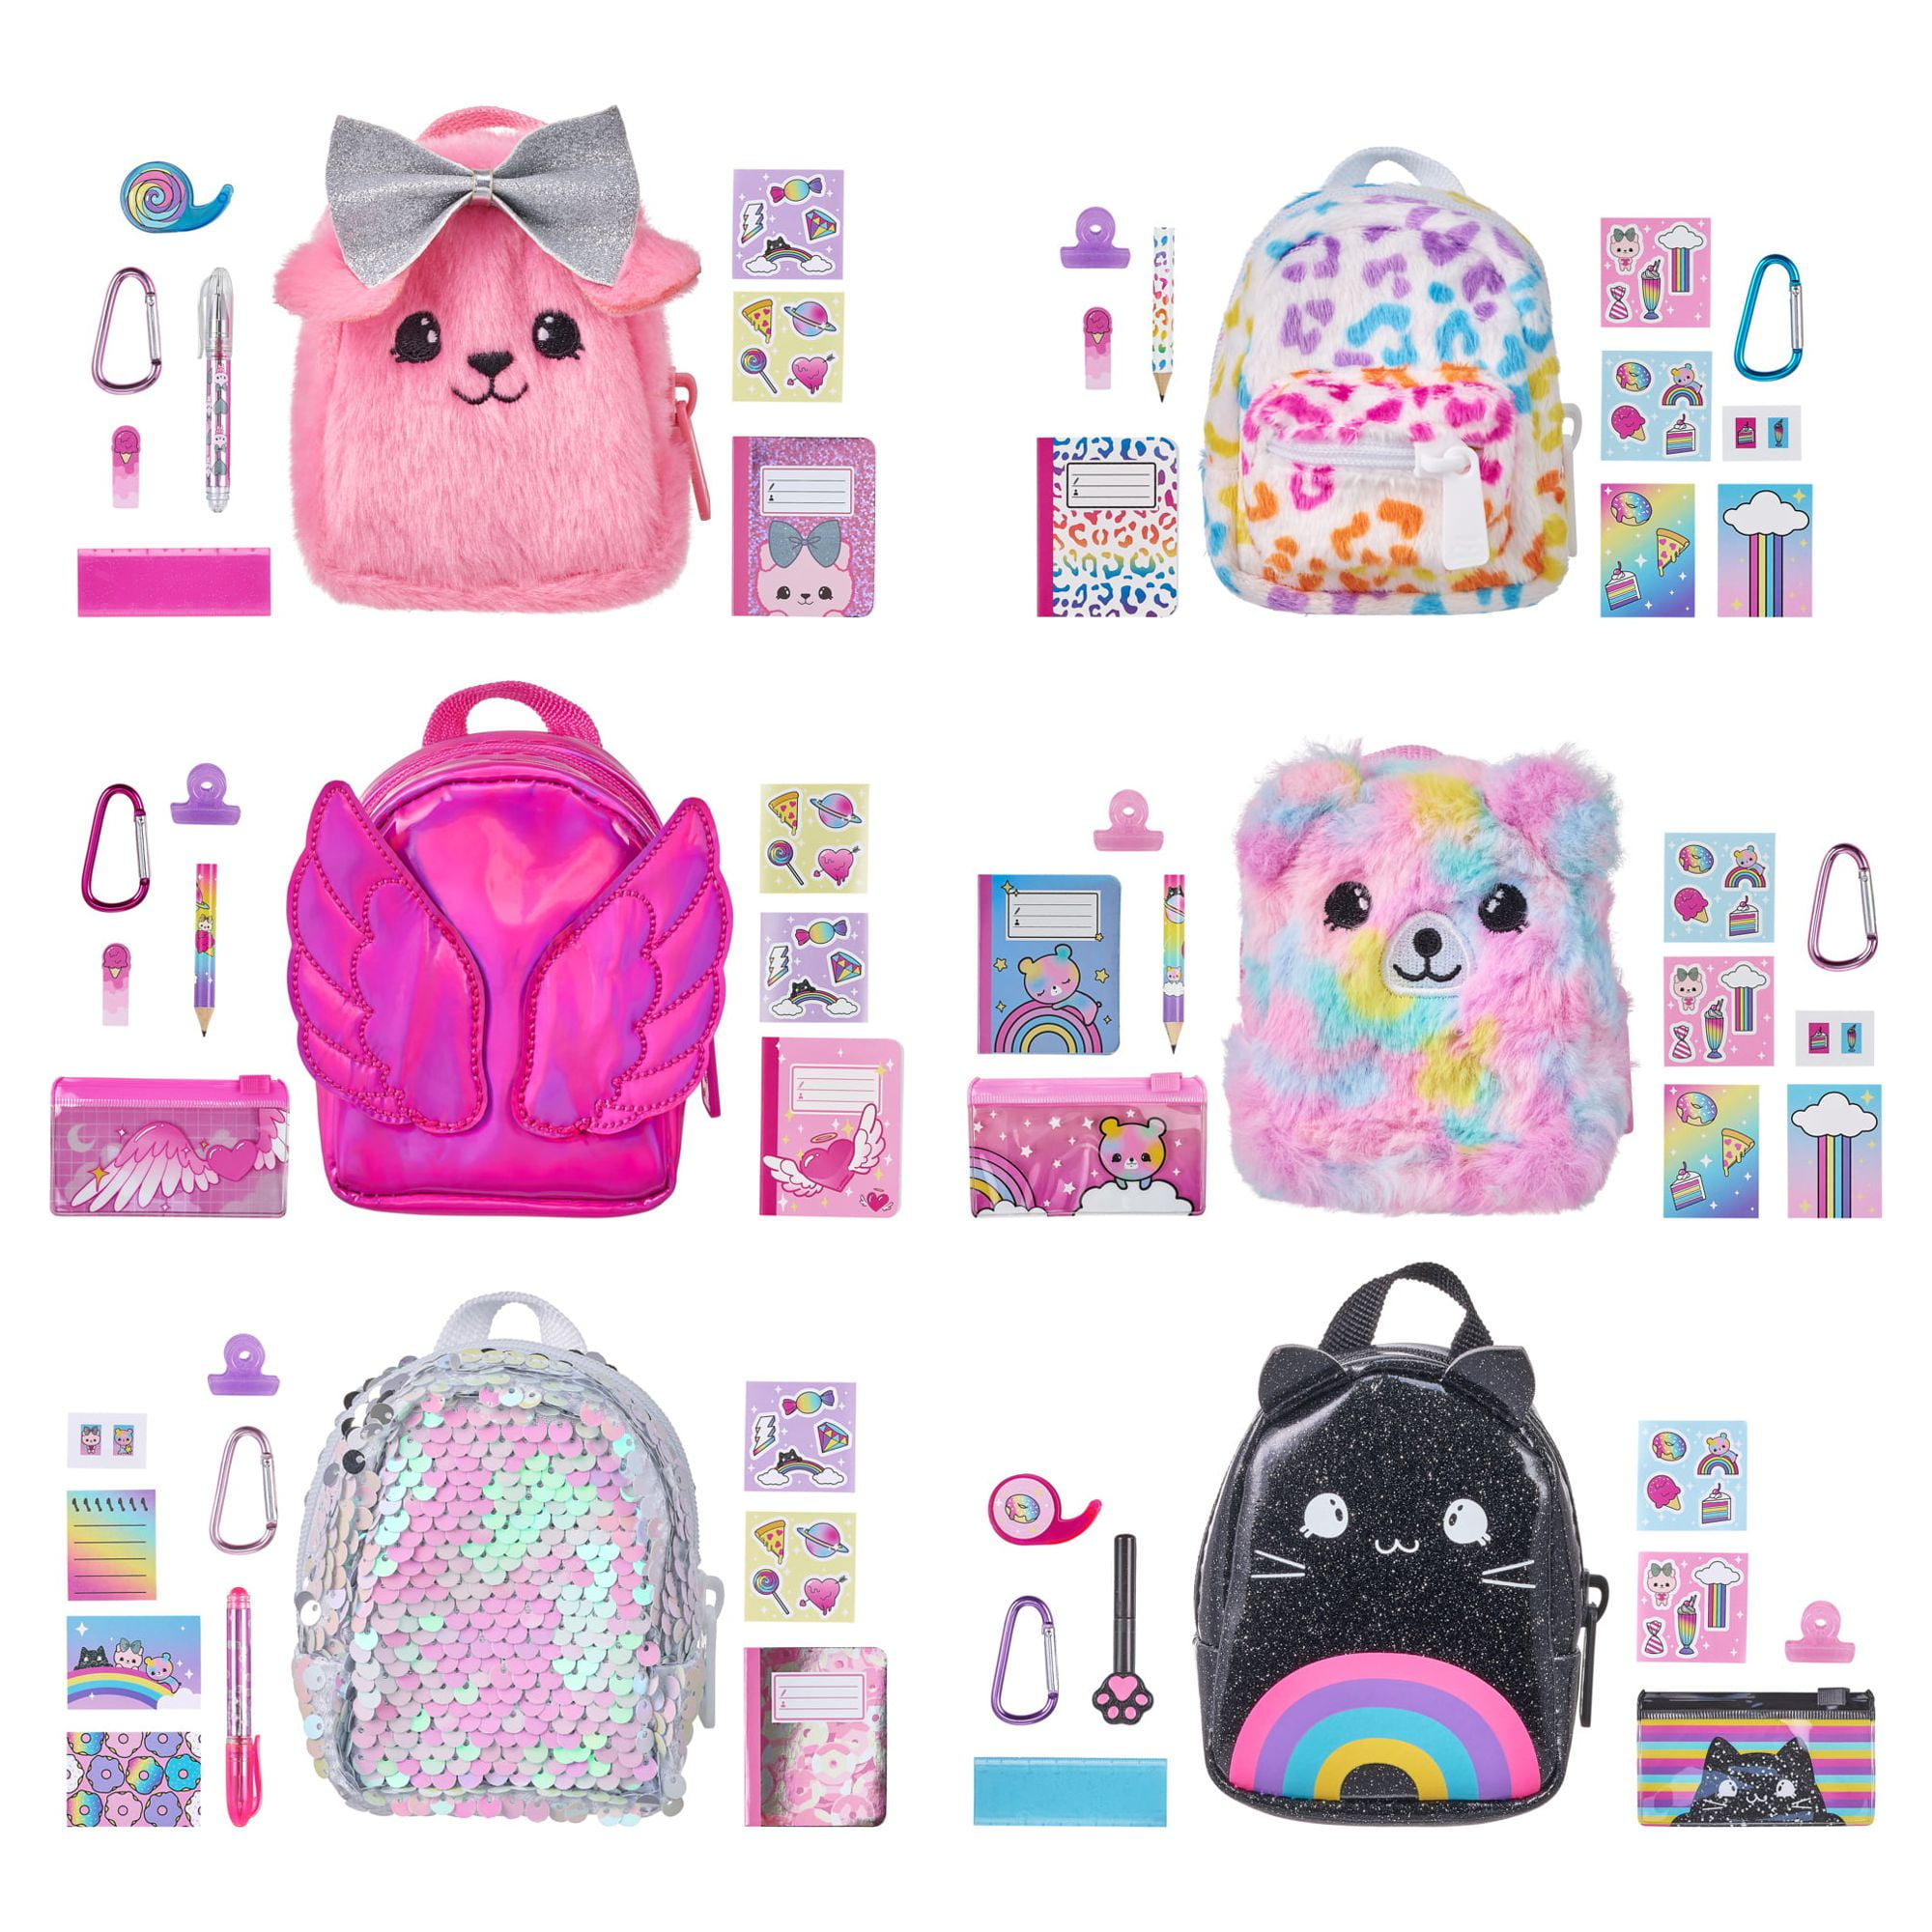 Real Littles - Collectible Micro Backpack and Micro Handbag with